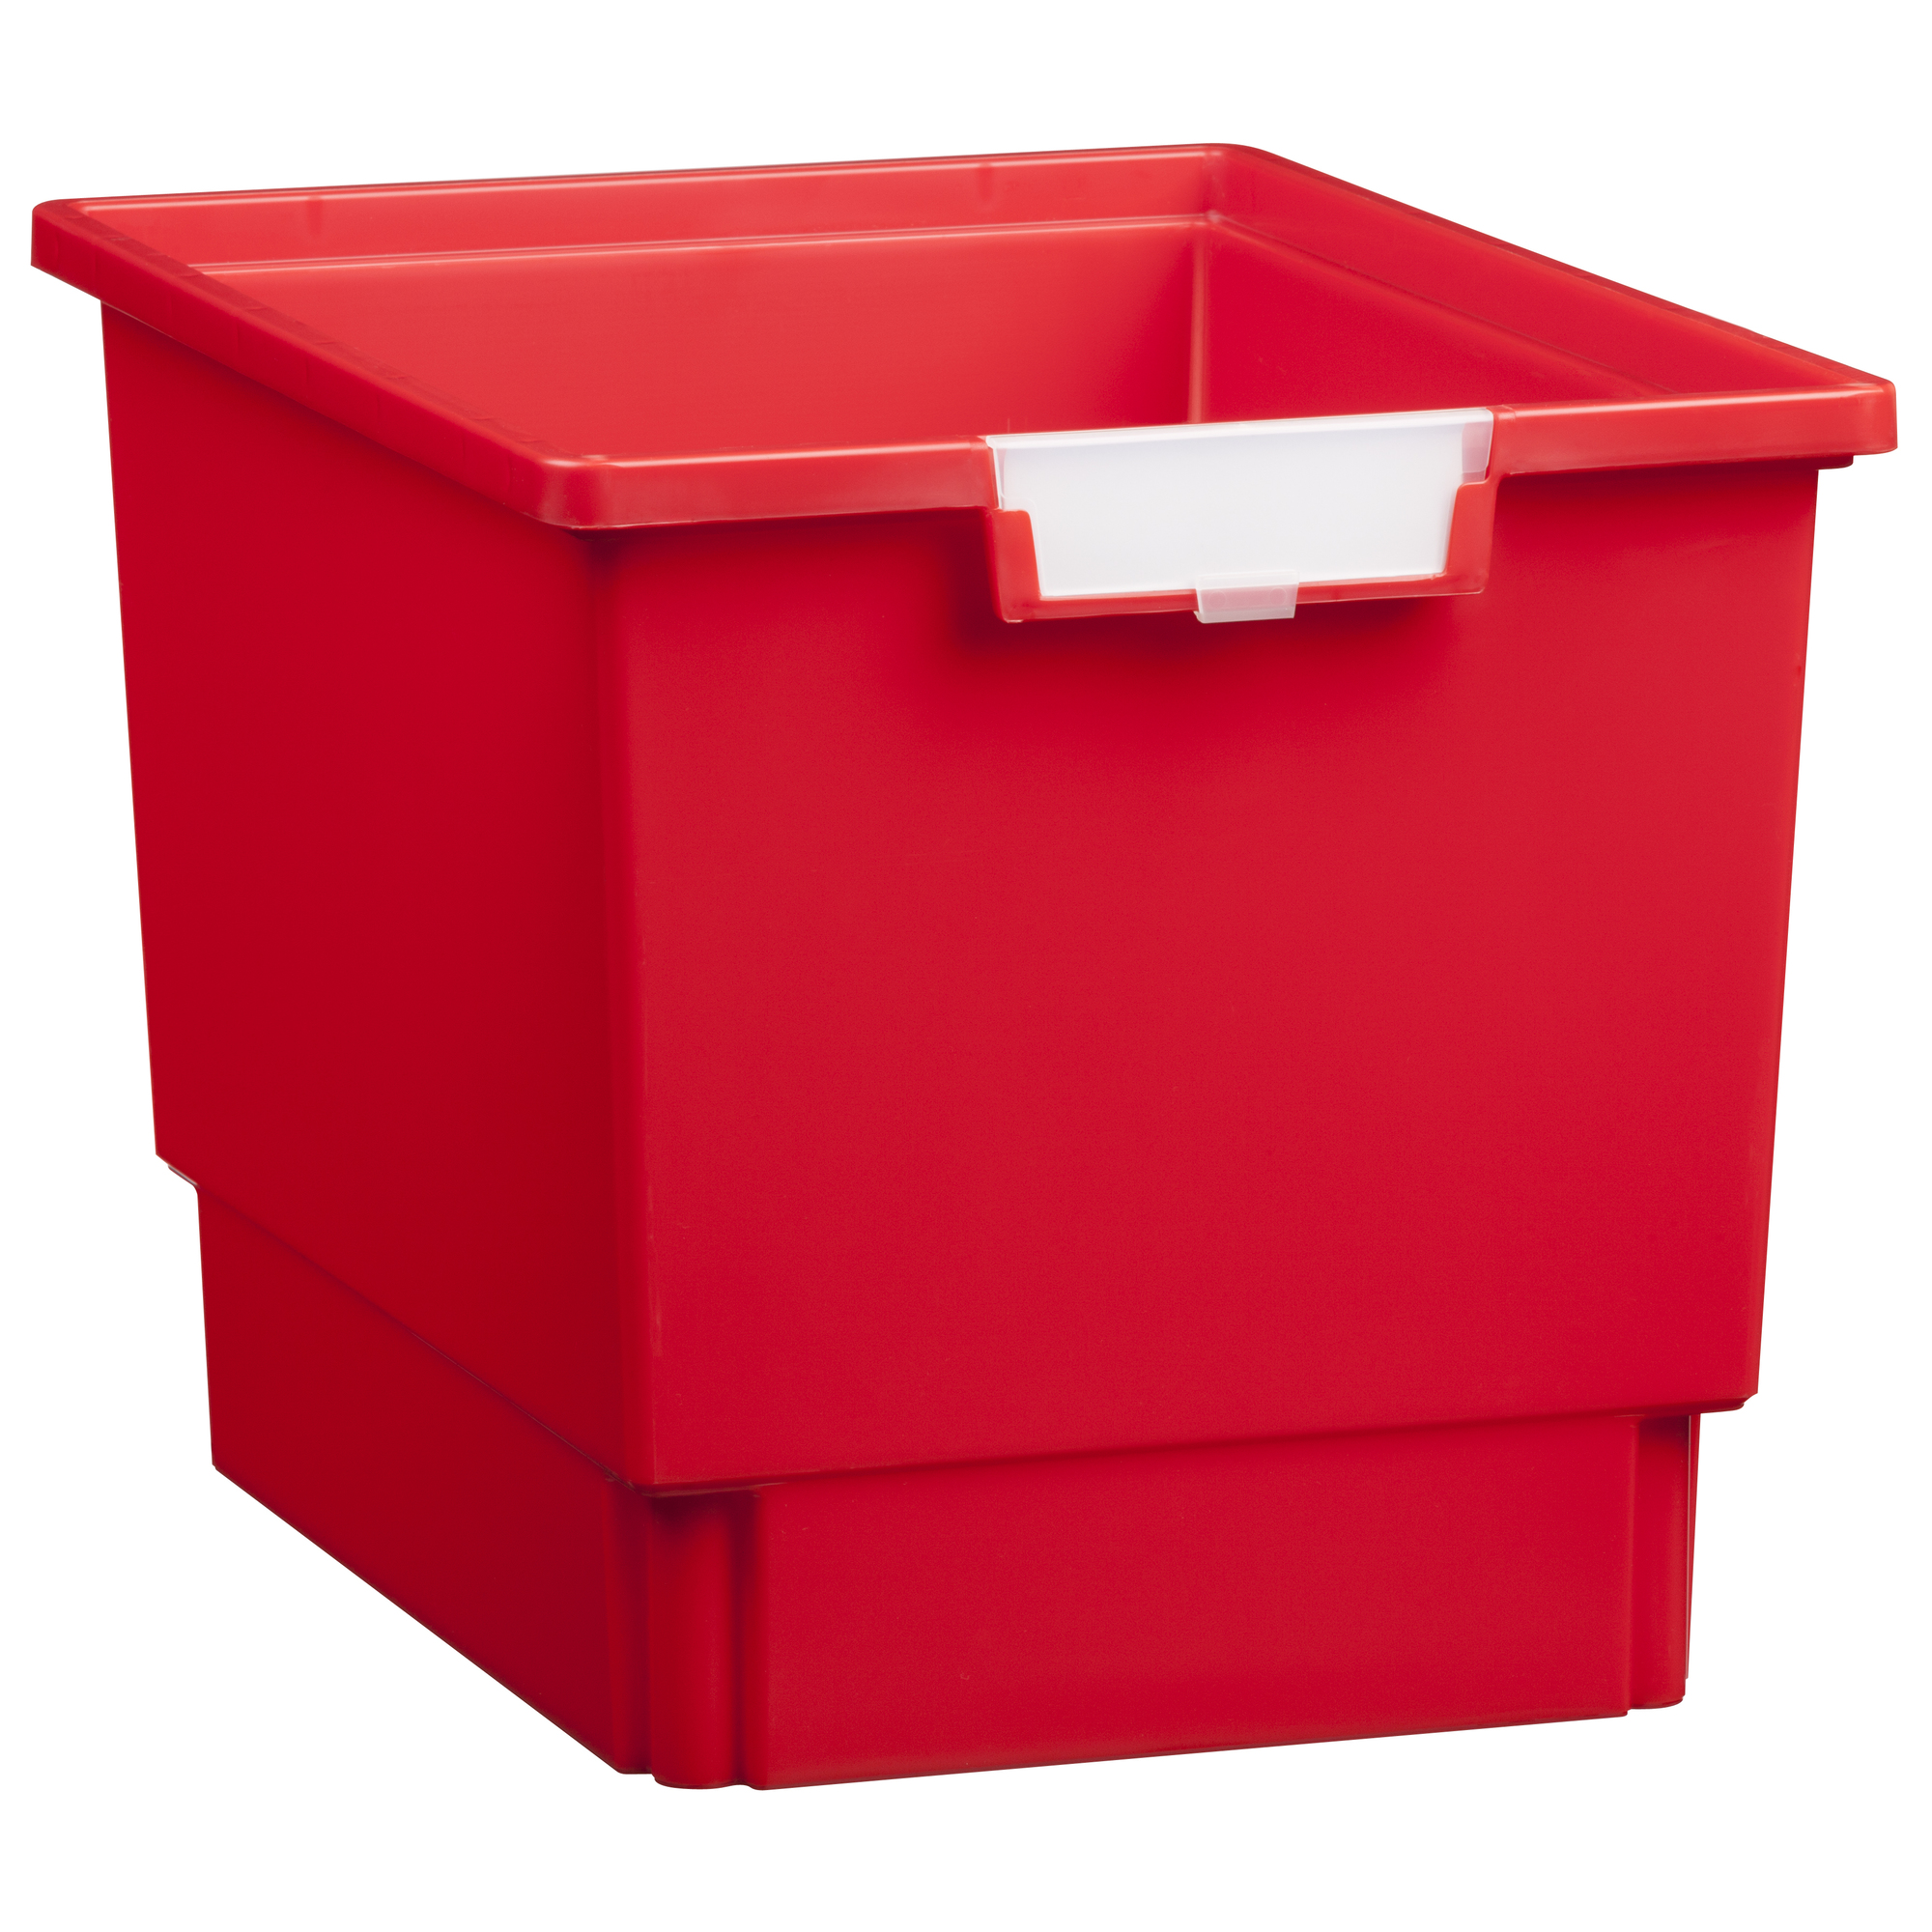 Certwood StorWerks, Slim Line 12Inch Tray in Primary Red-3PK, Included (qty.) 3 Height 12 in, Model CE1954PR3